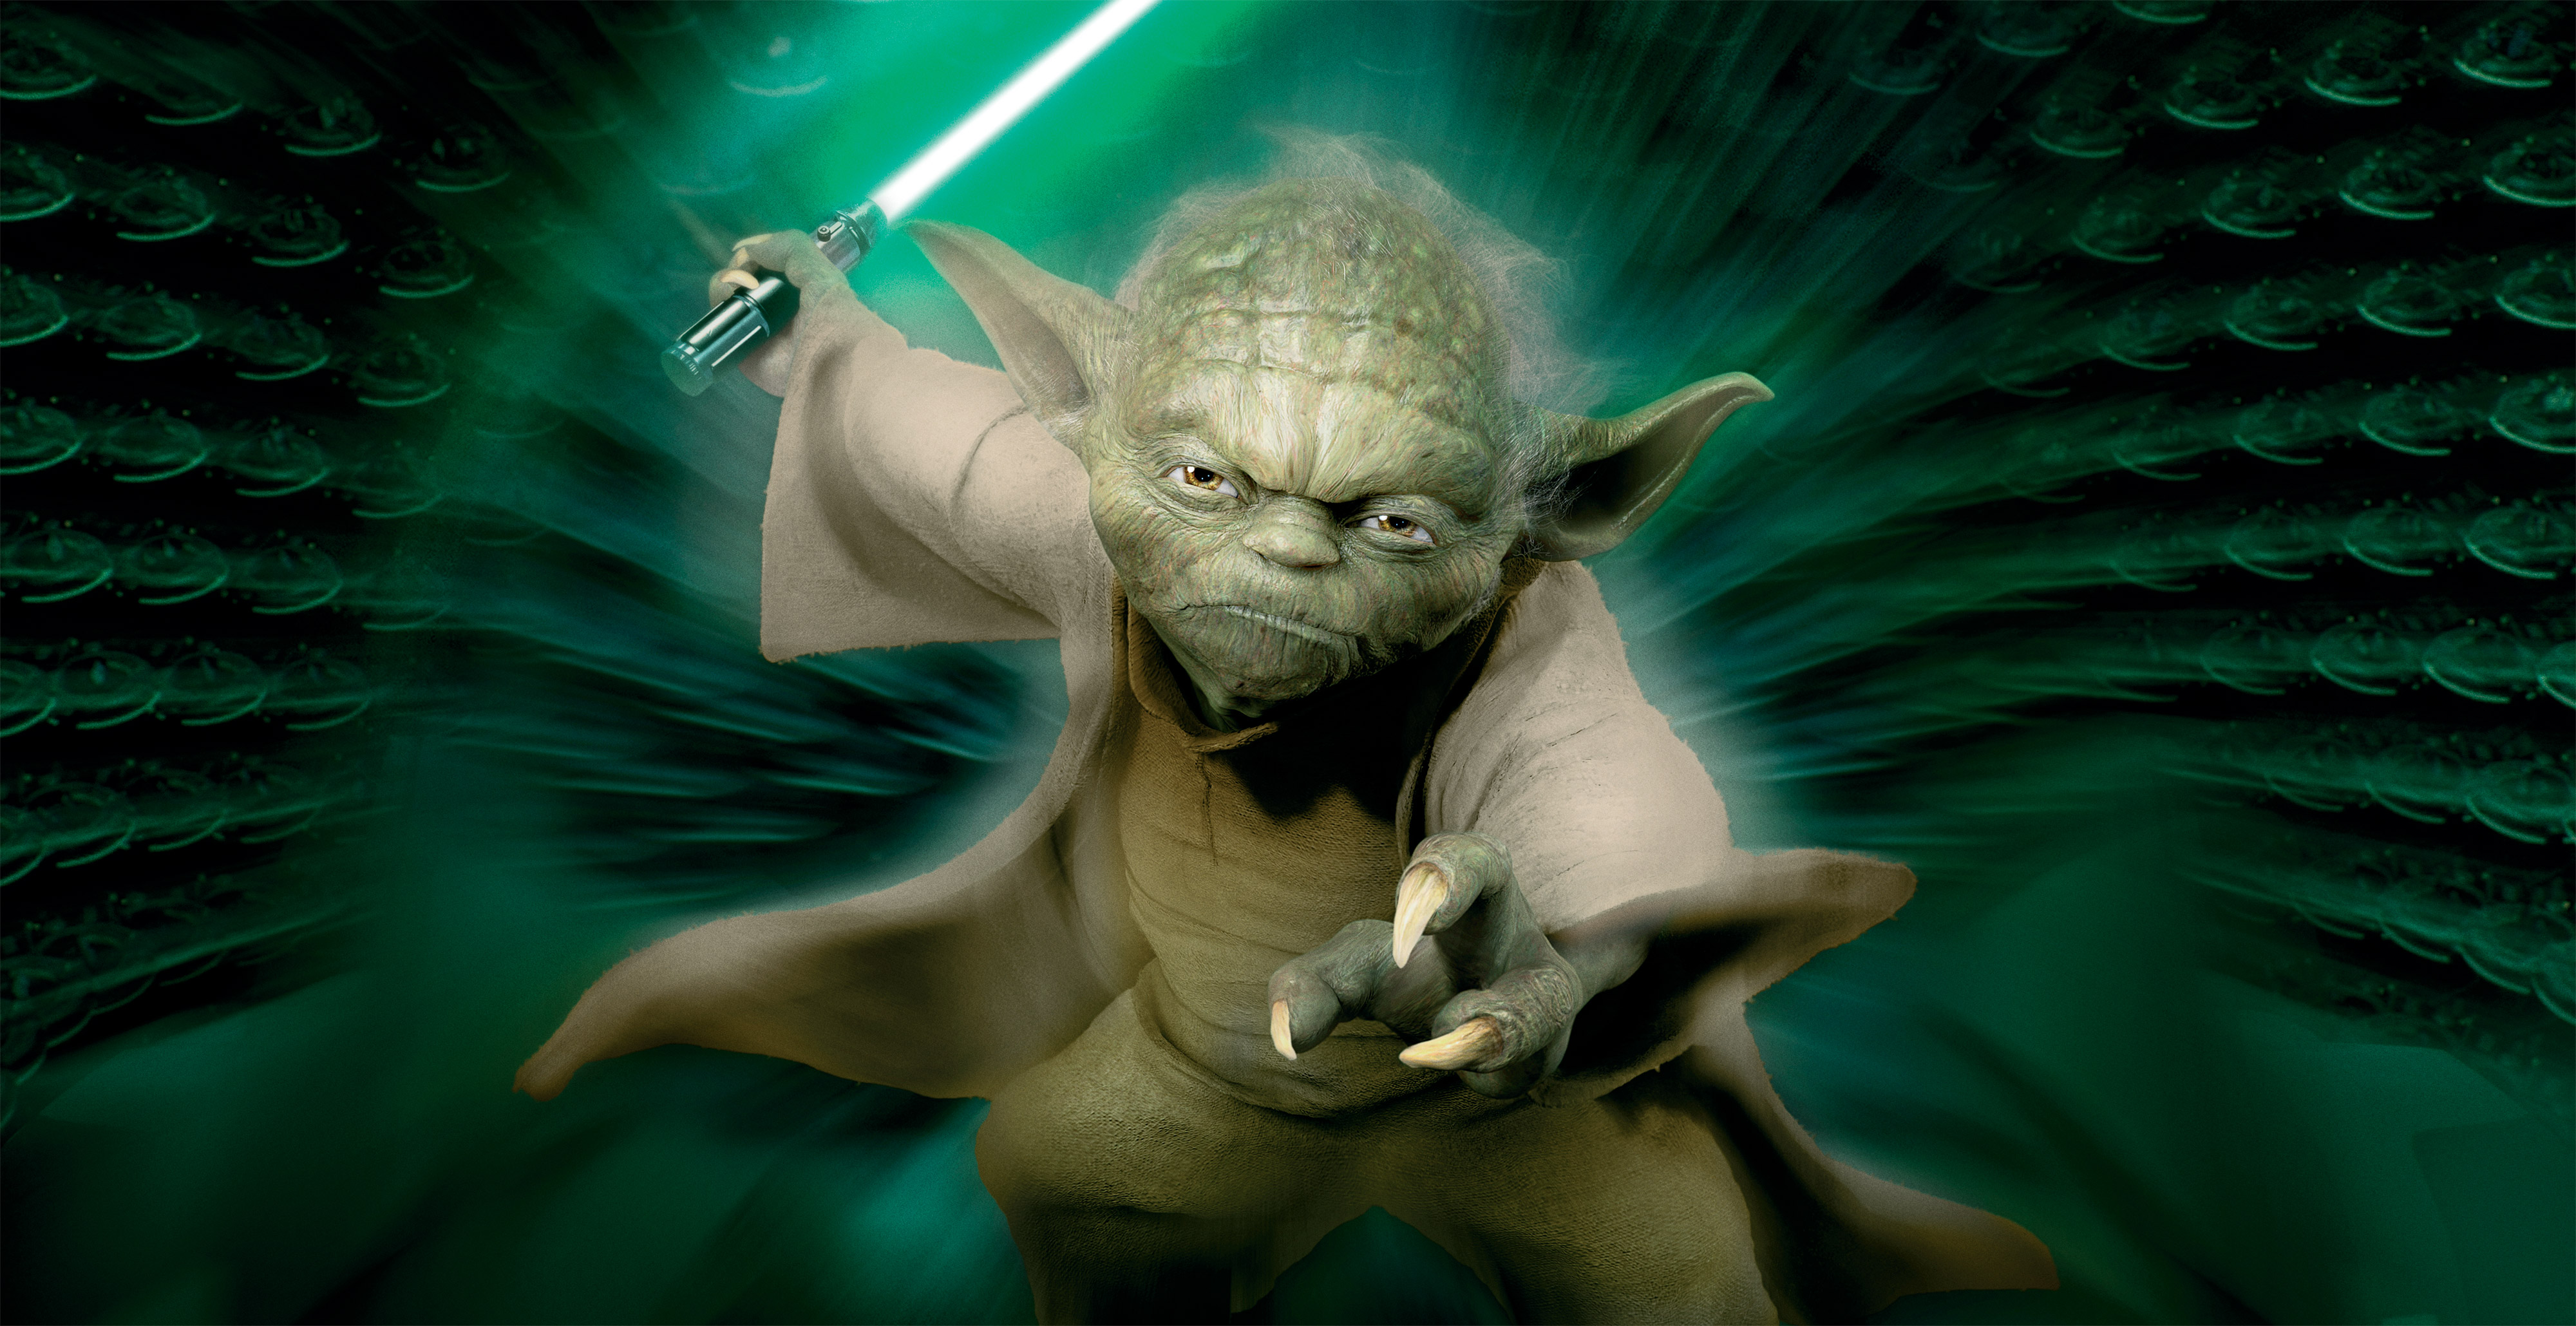 X yoda star wars k laptop full hd p hd k wallpapers images backgrounds photos and pictures